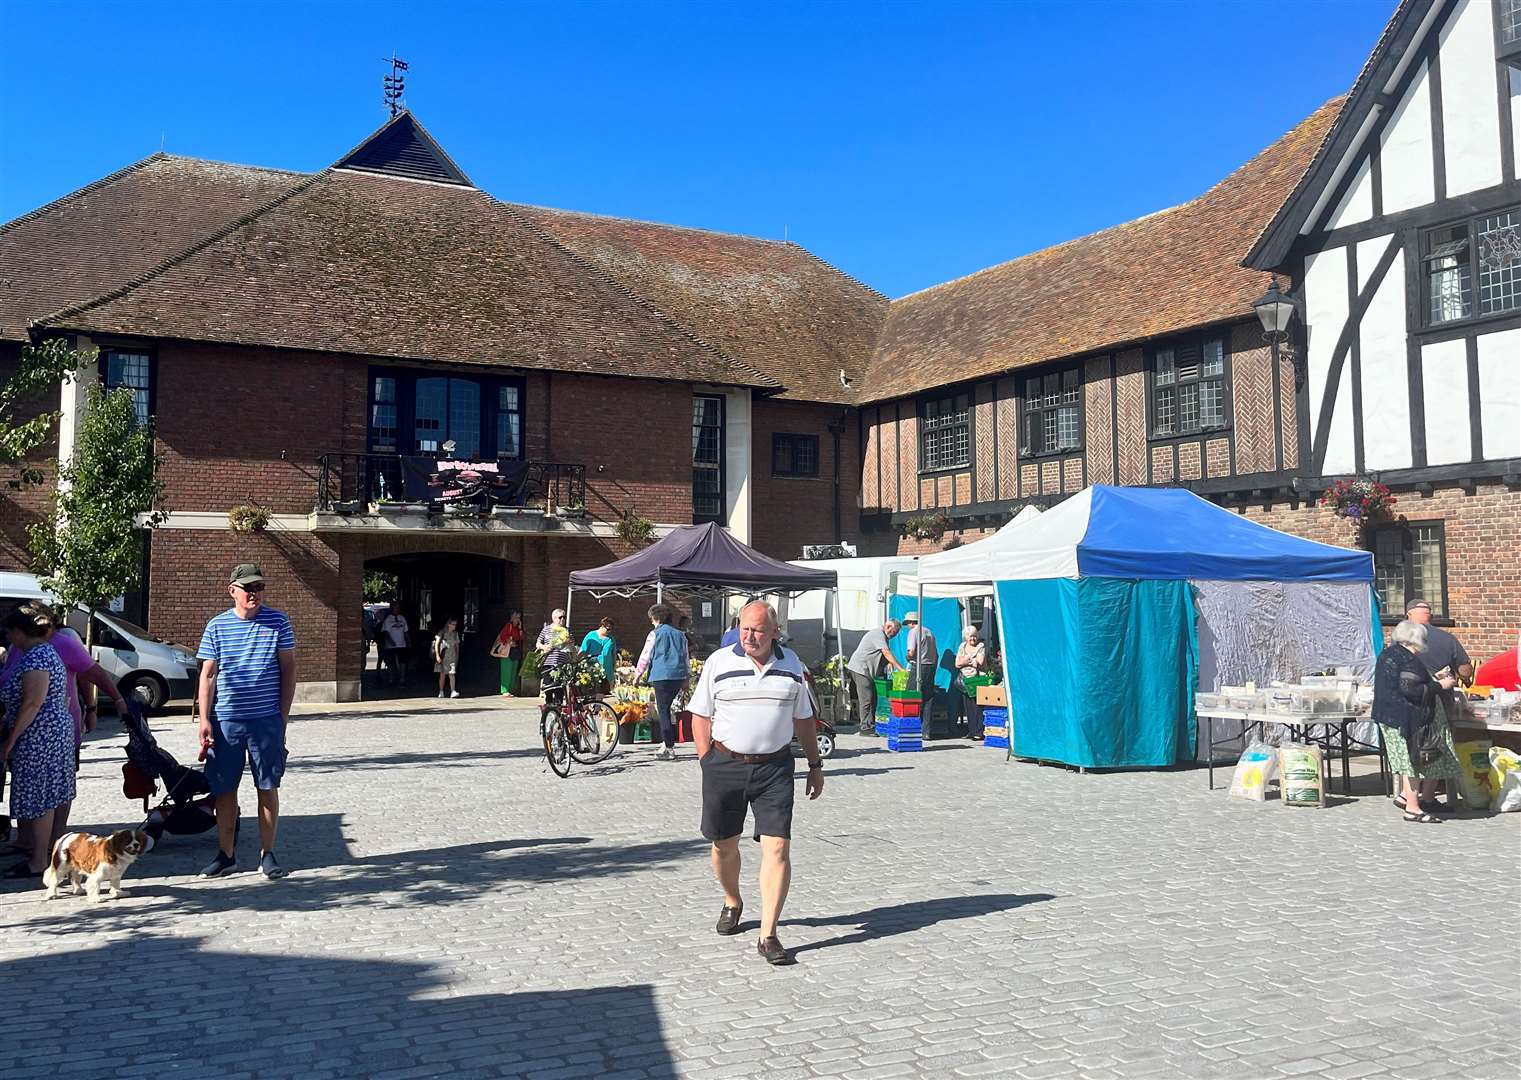 Work to overhaul Guildhall Square in Sandwich is now complete, but cost more than £1 million